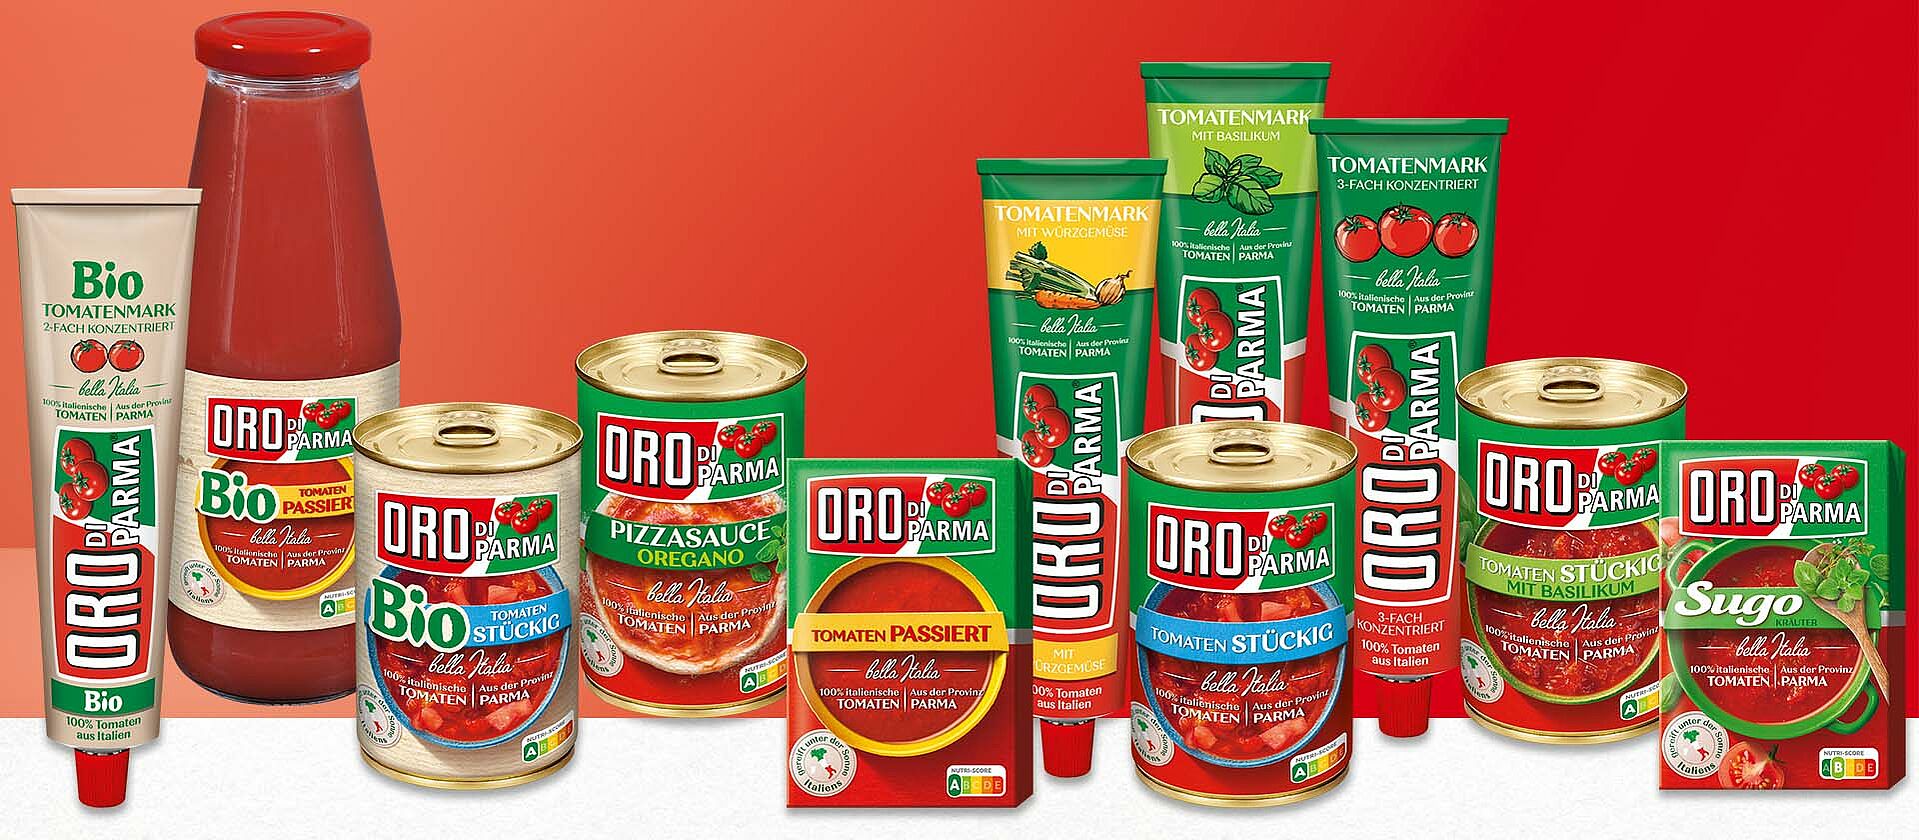 Products made of sun-ripened di tomatoes ORO | Parma